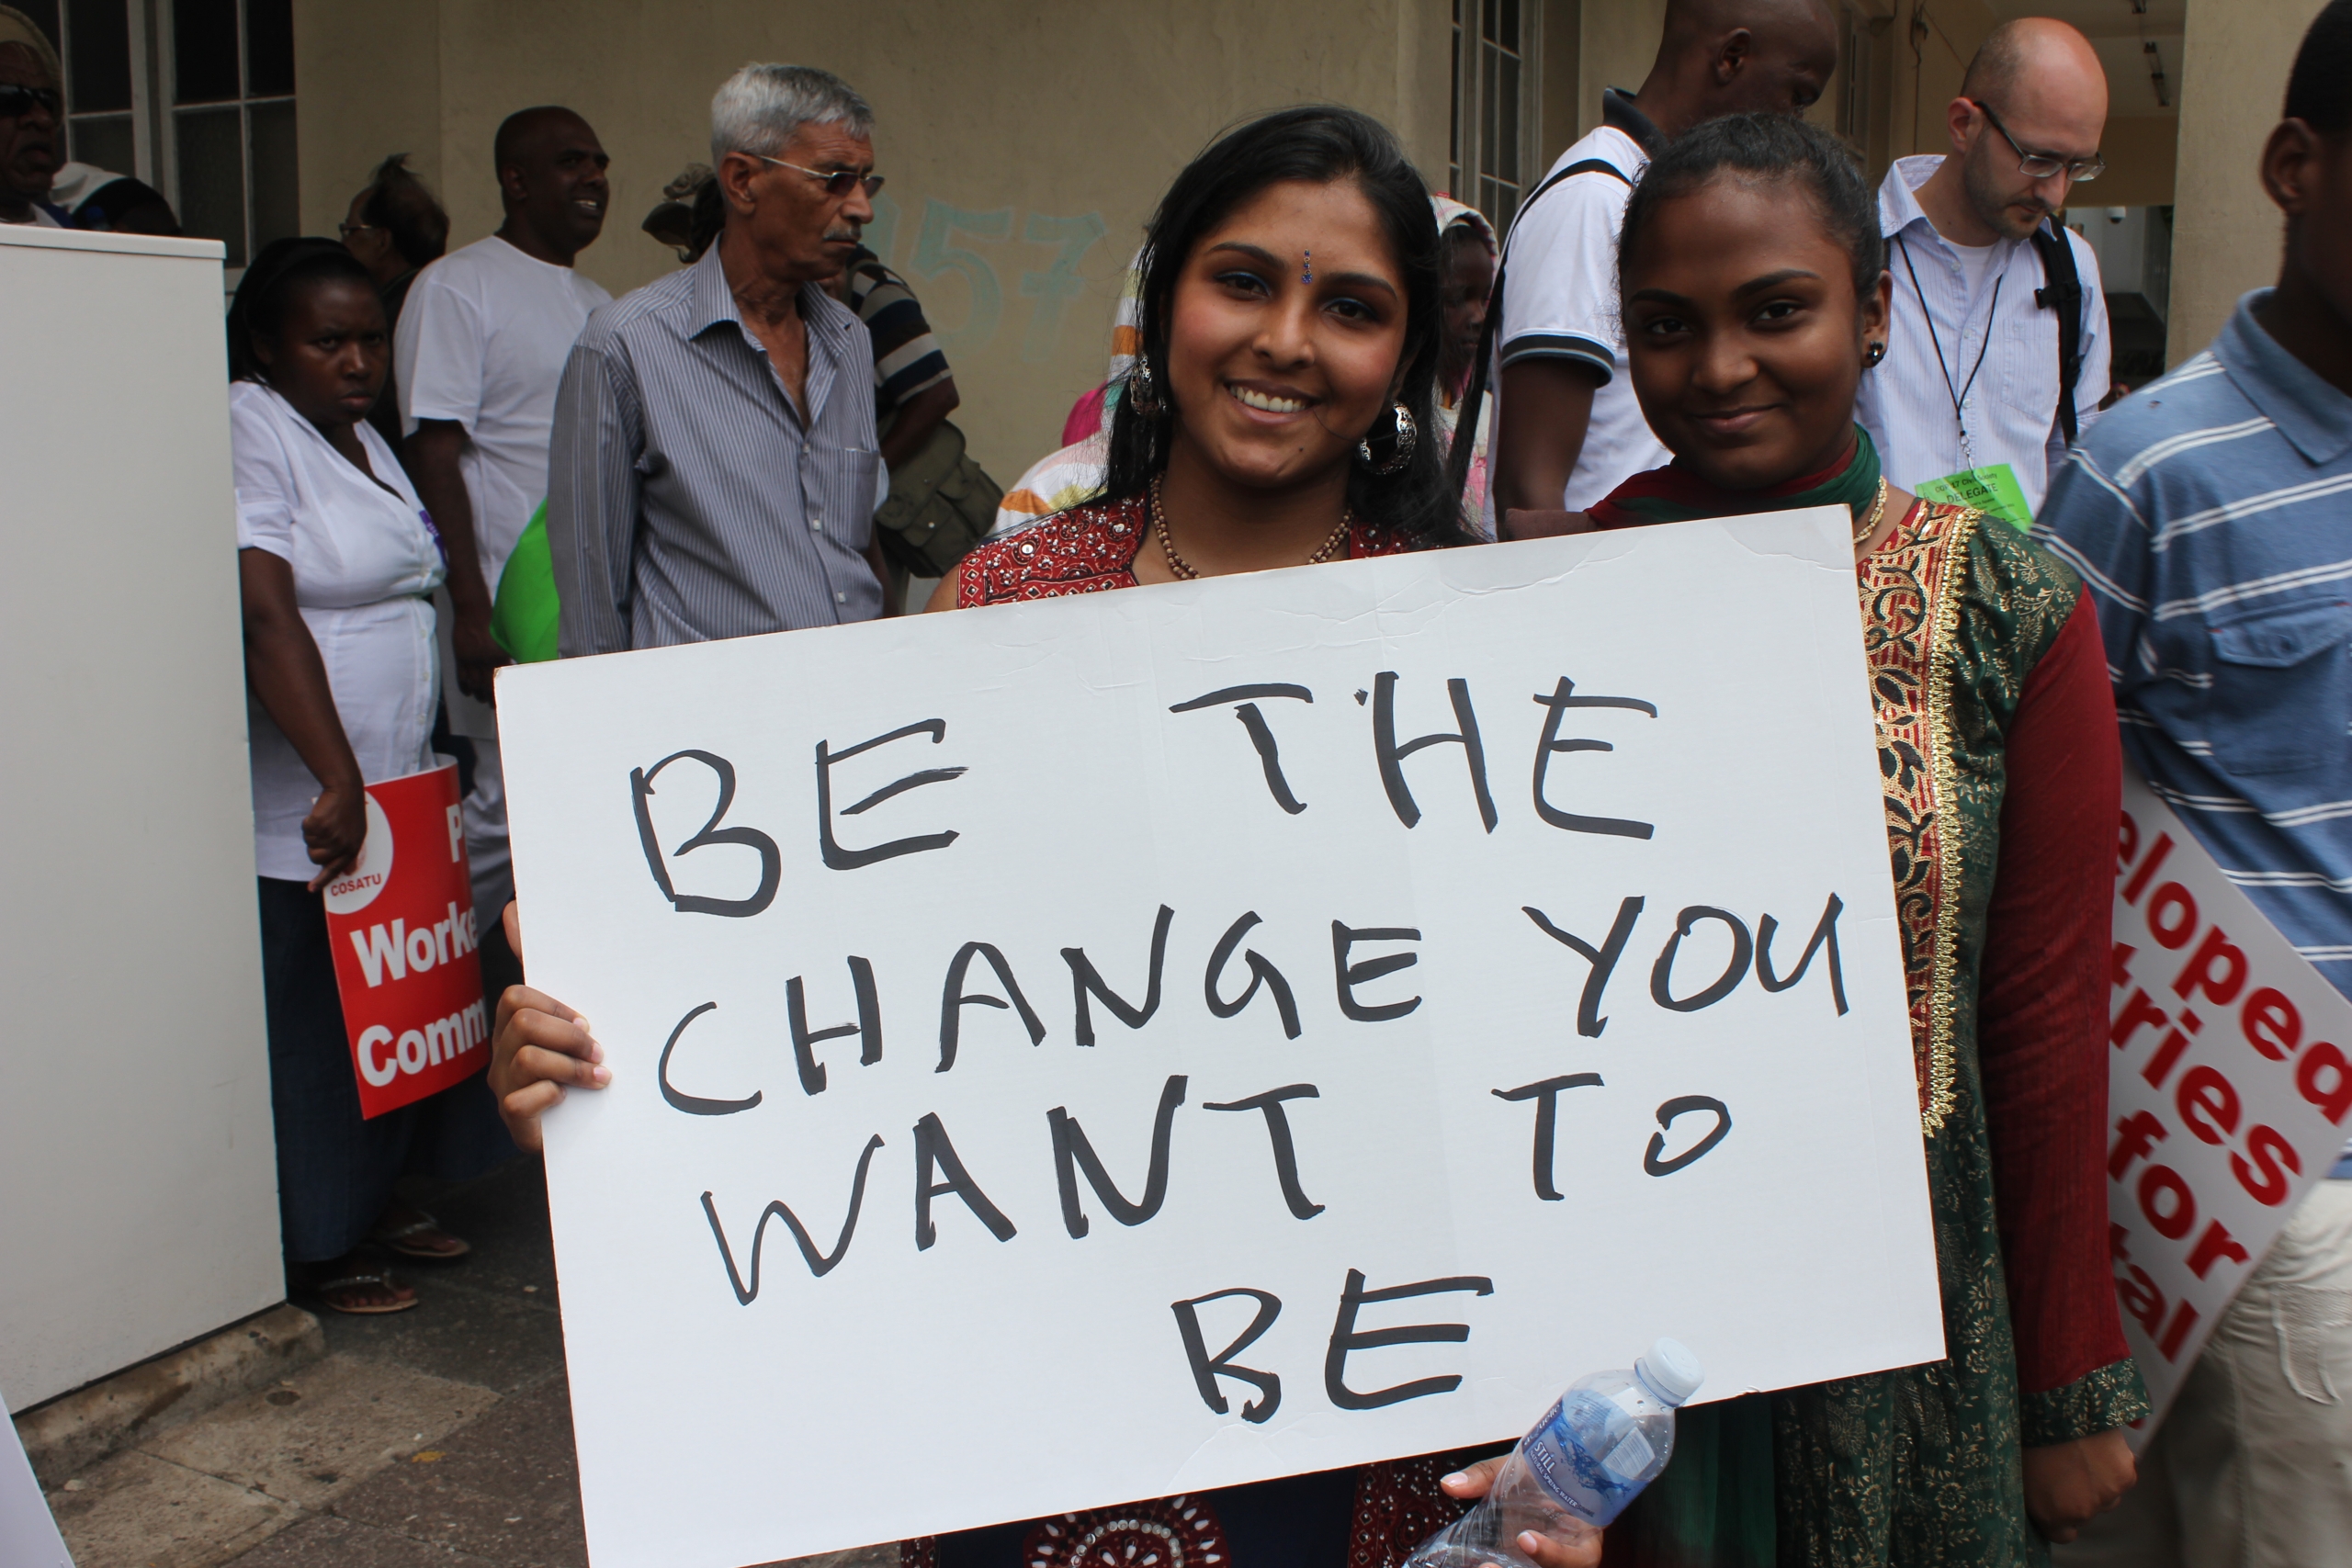 Two adolescents in Durban, South Africa hold a sign that reads "BE THE CHANGE YOU WANT TO BE" during a climate change protest.